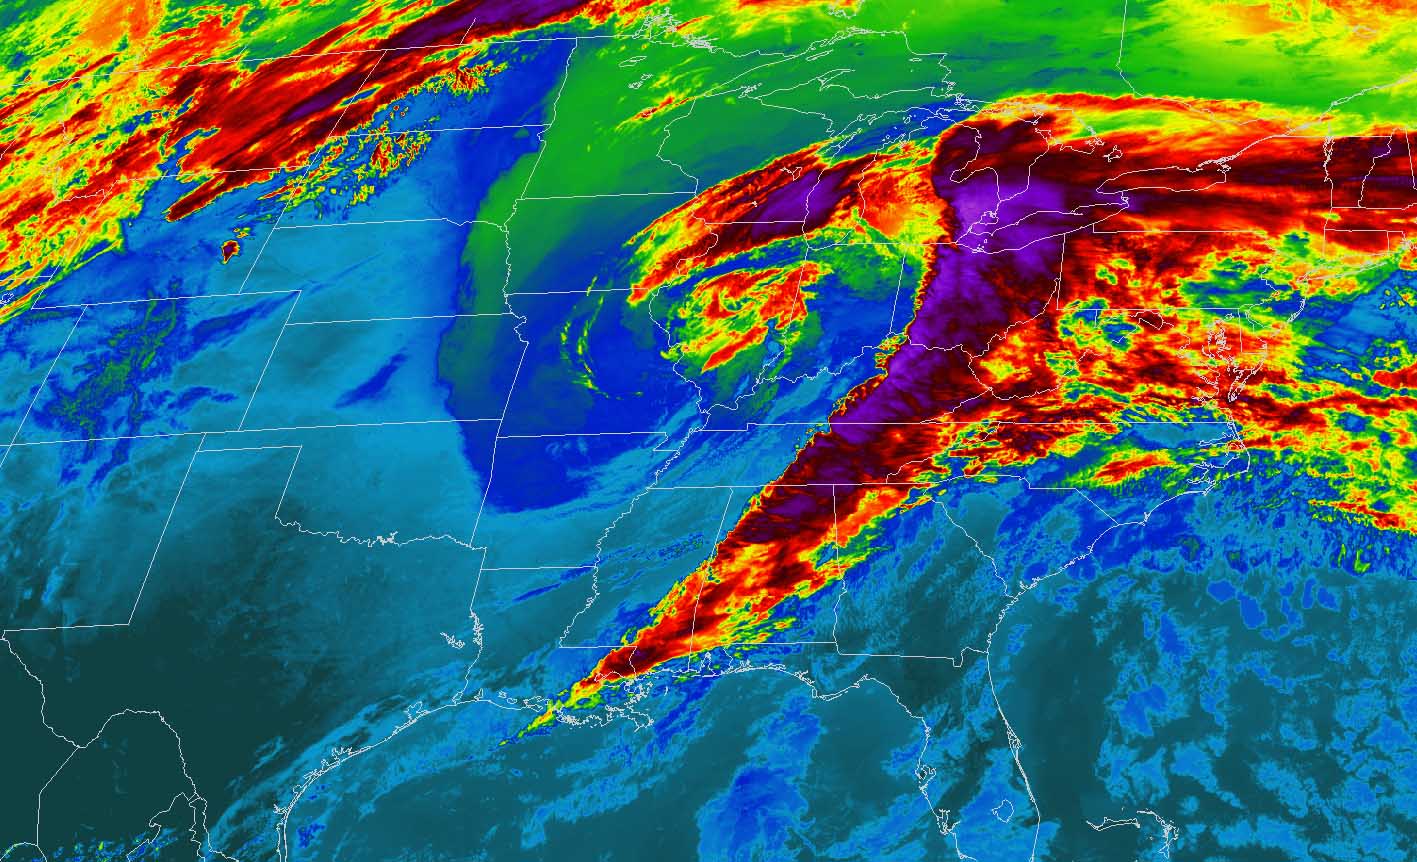 A spectacular satellite view of a frontal system racing across the United States today, while